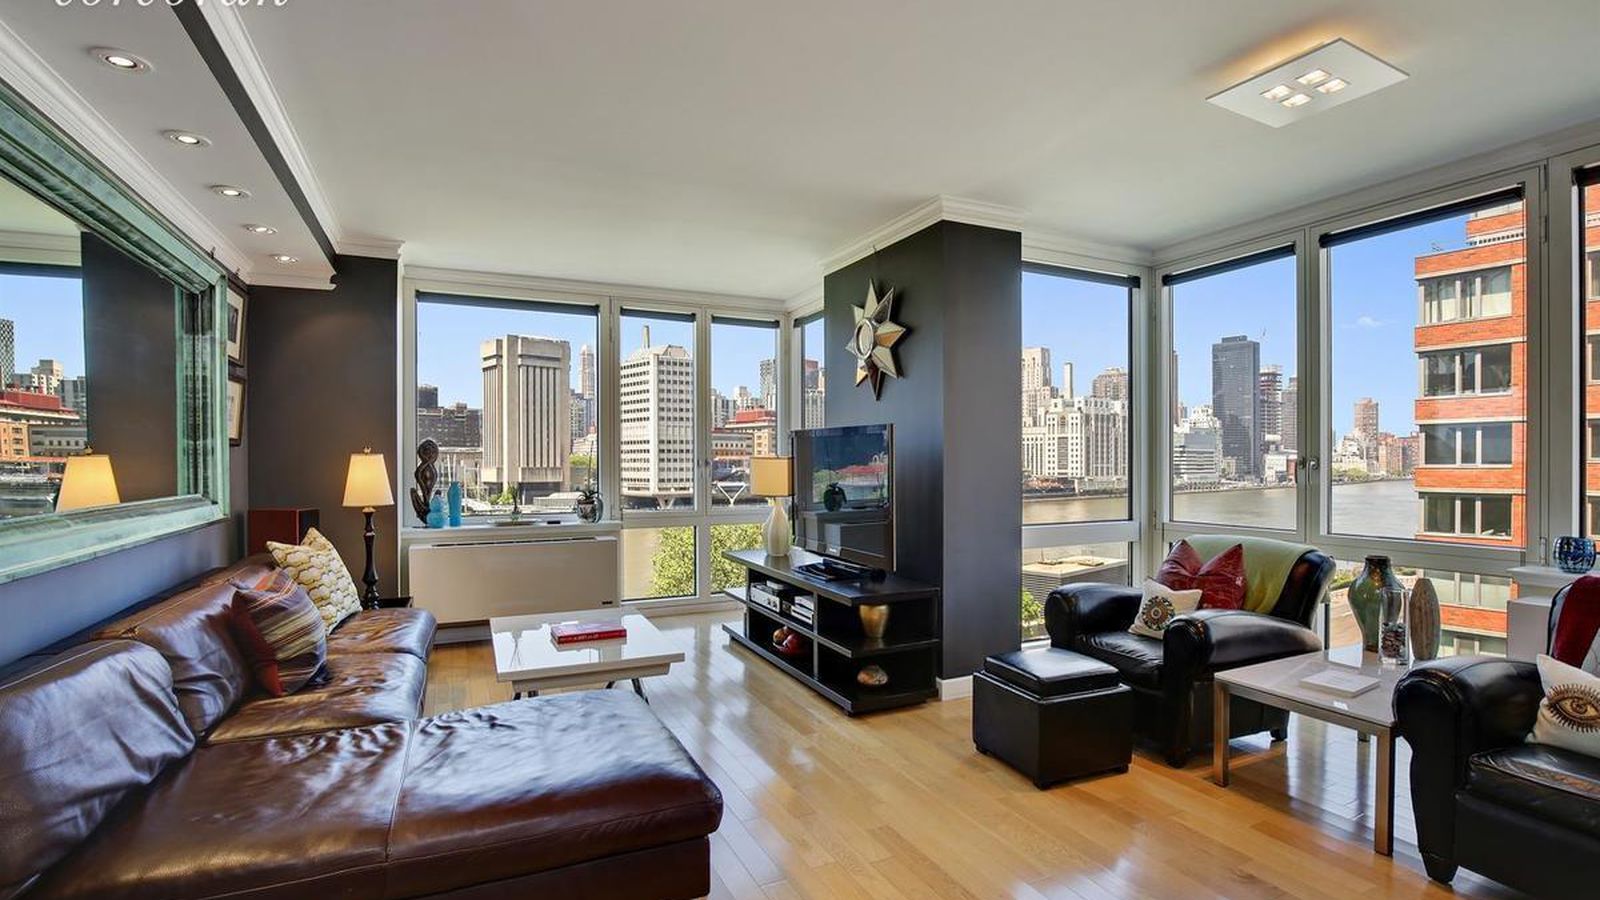 Roosevelt Islands priciest listing ever is this $2M condo ...